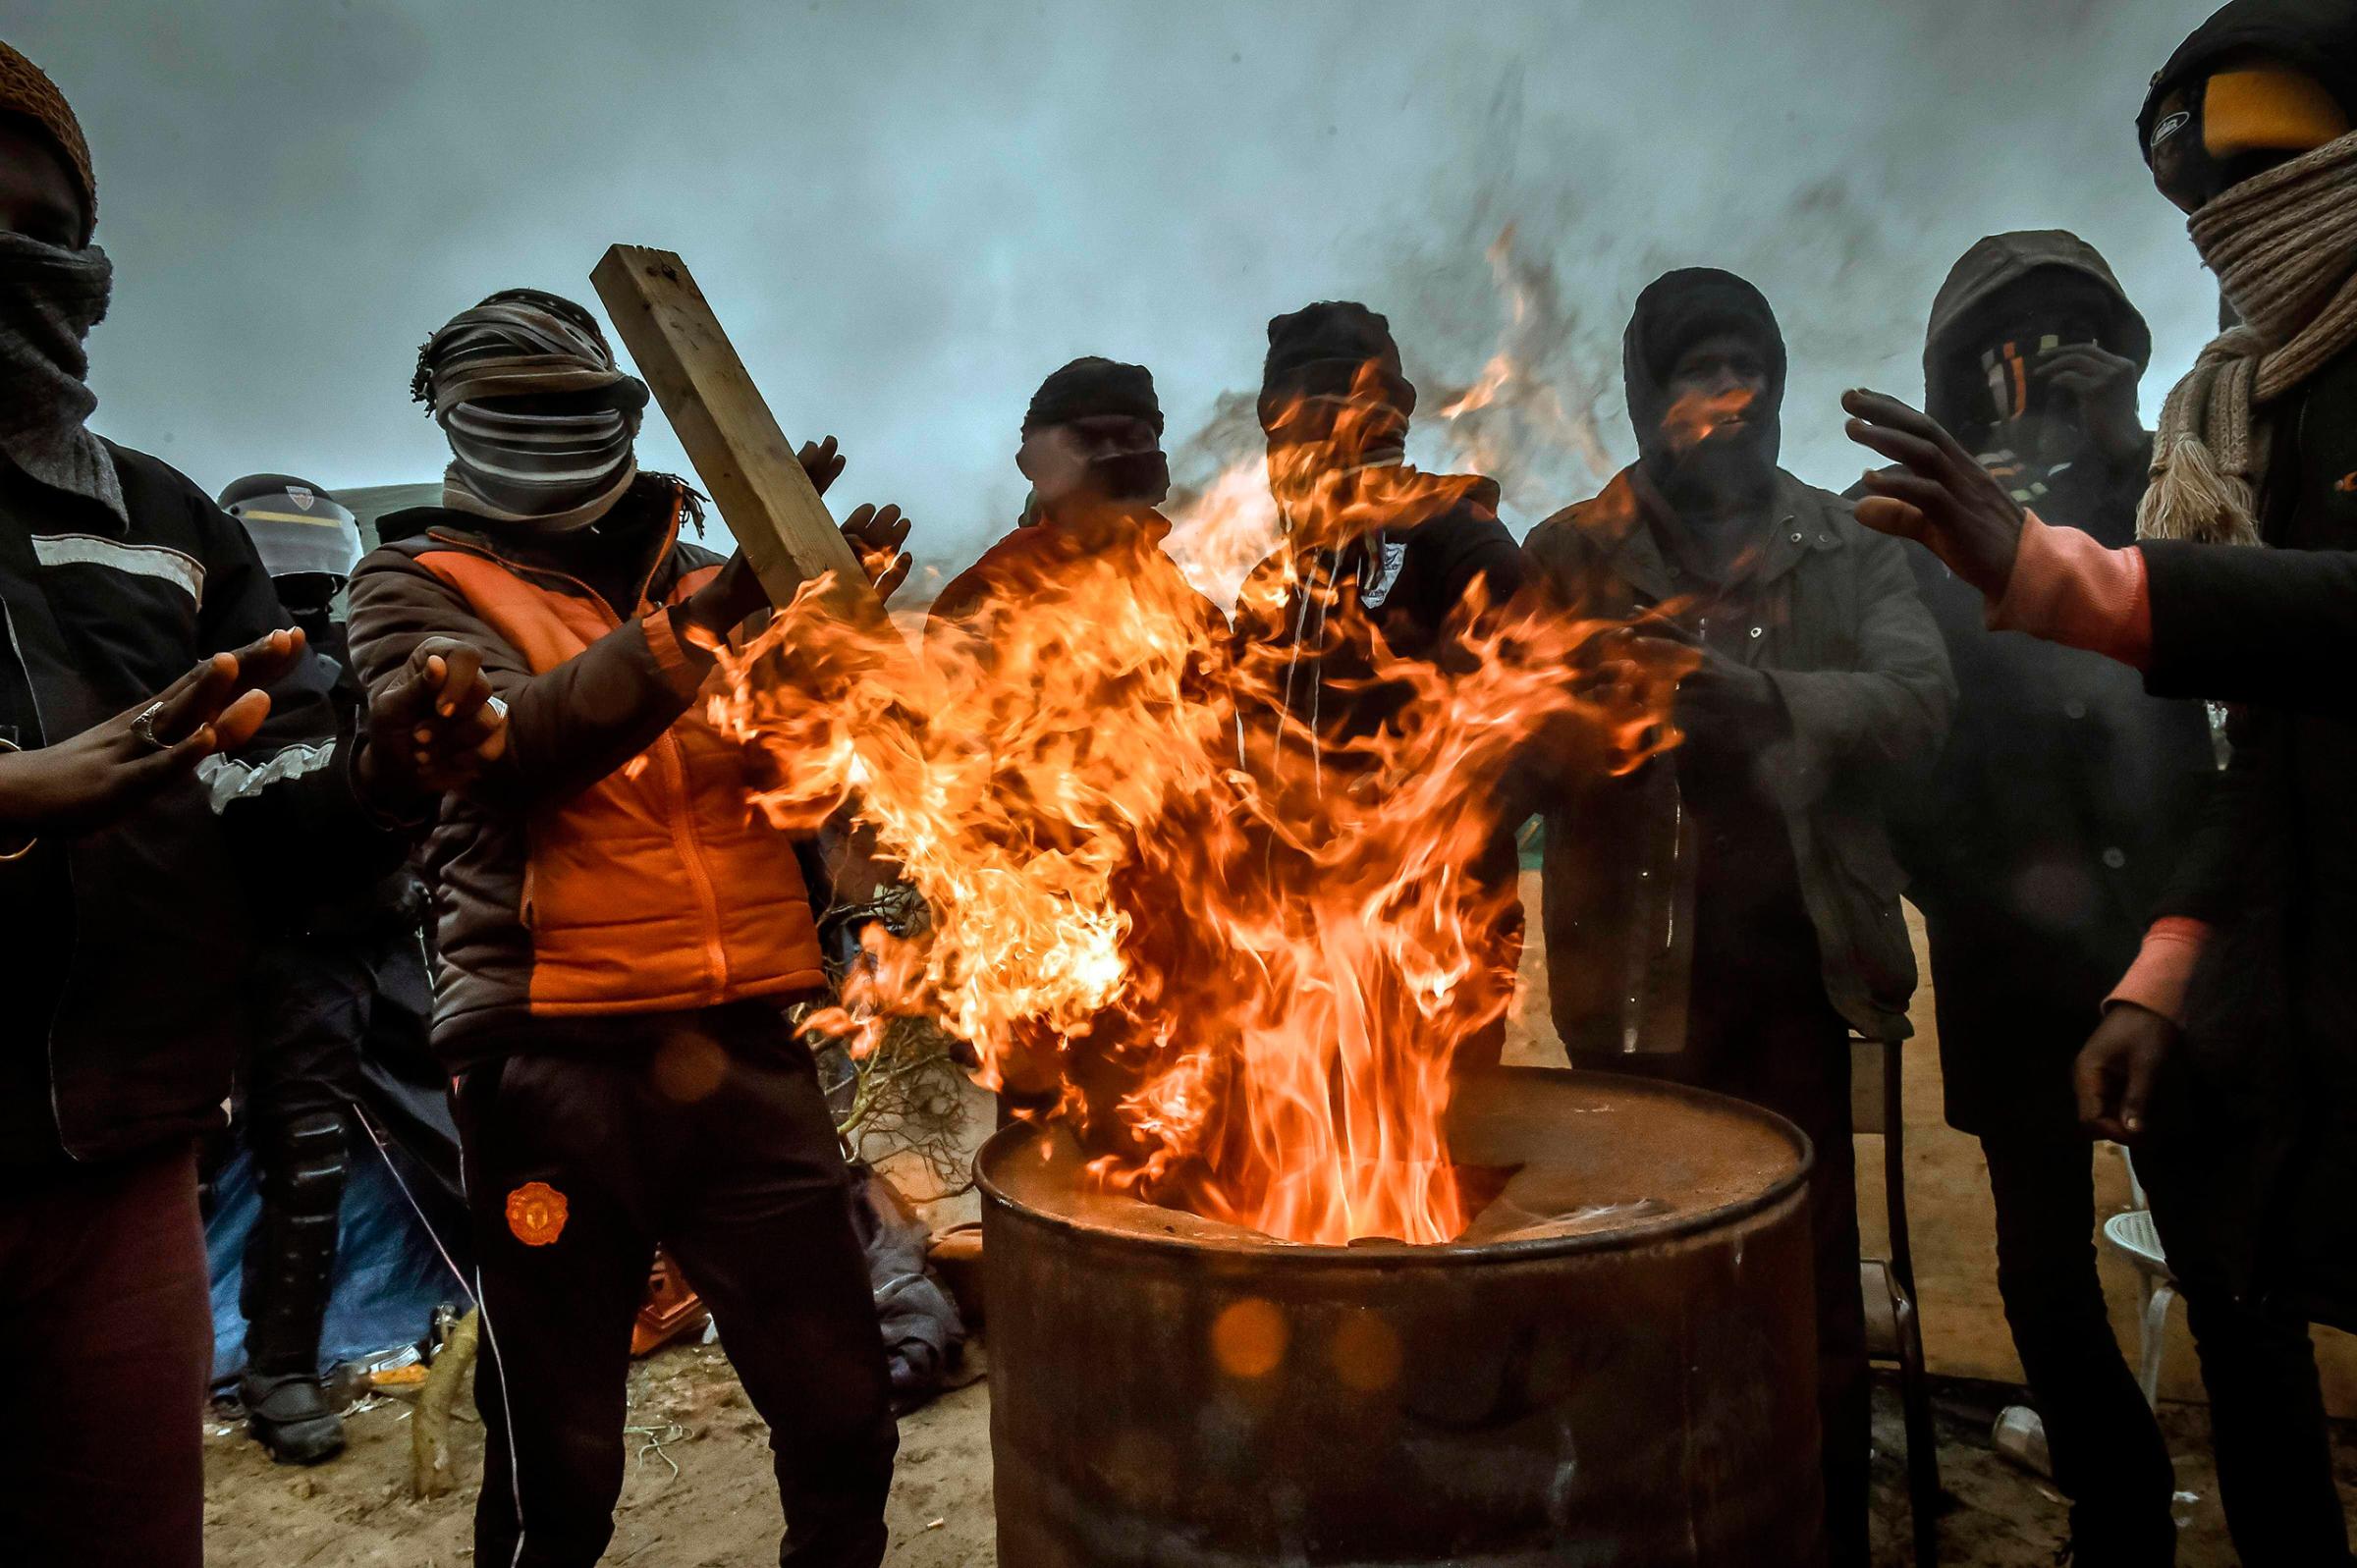 Migrants keep warm around a fire in a trash can as authorities dismantle shacks in the "Jungle" camp in Calais, France, March 1, 2016.